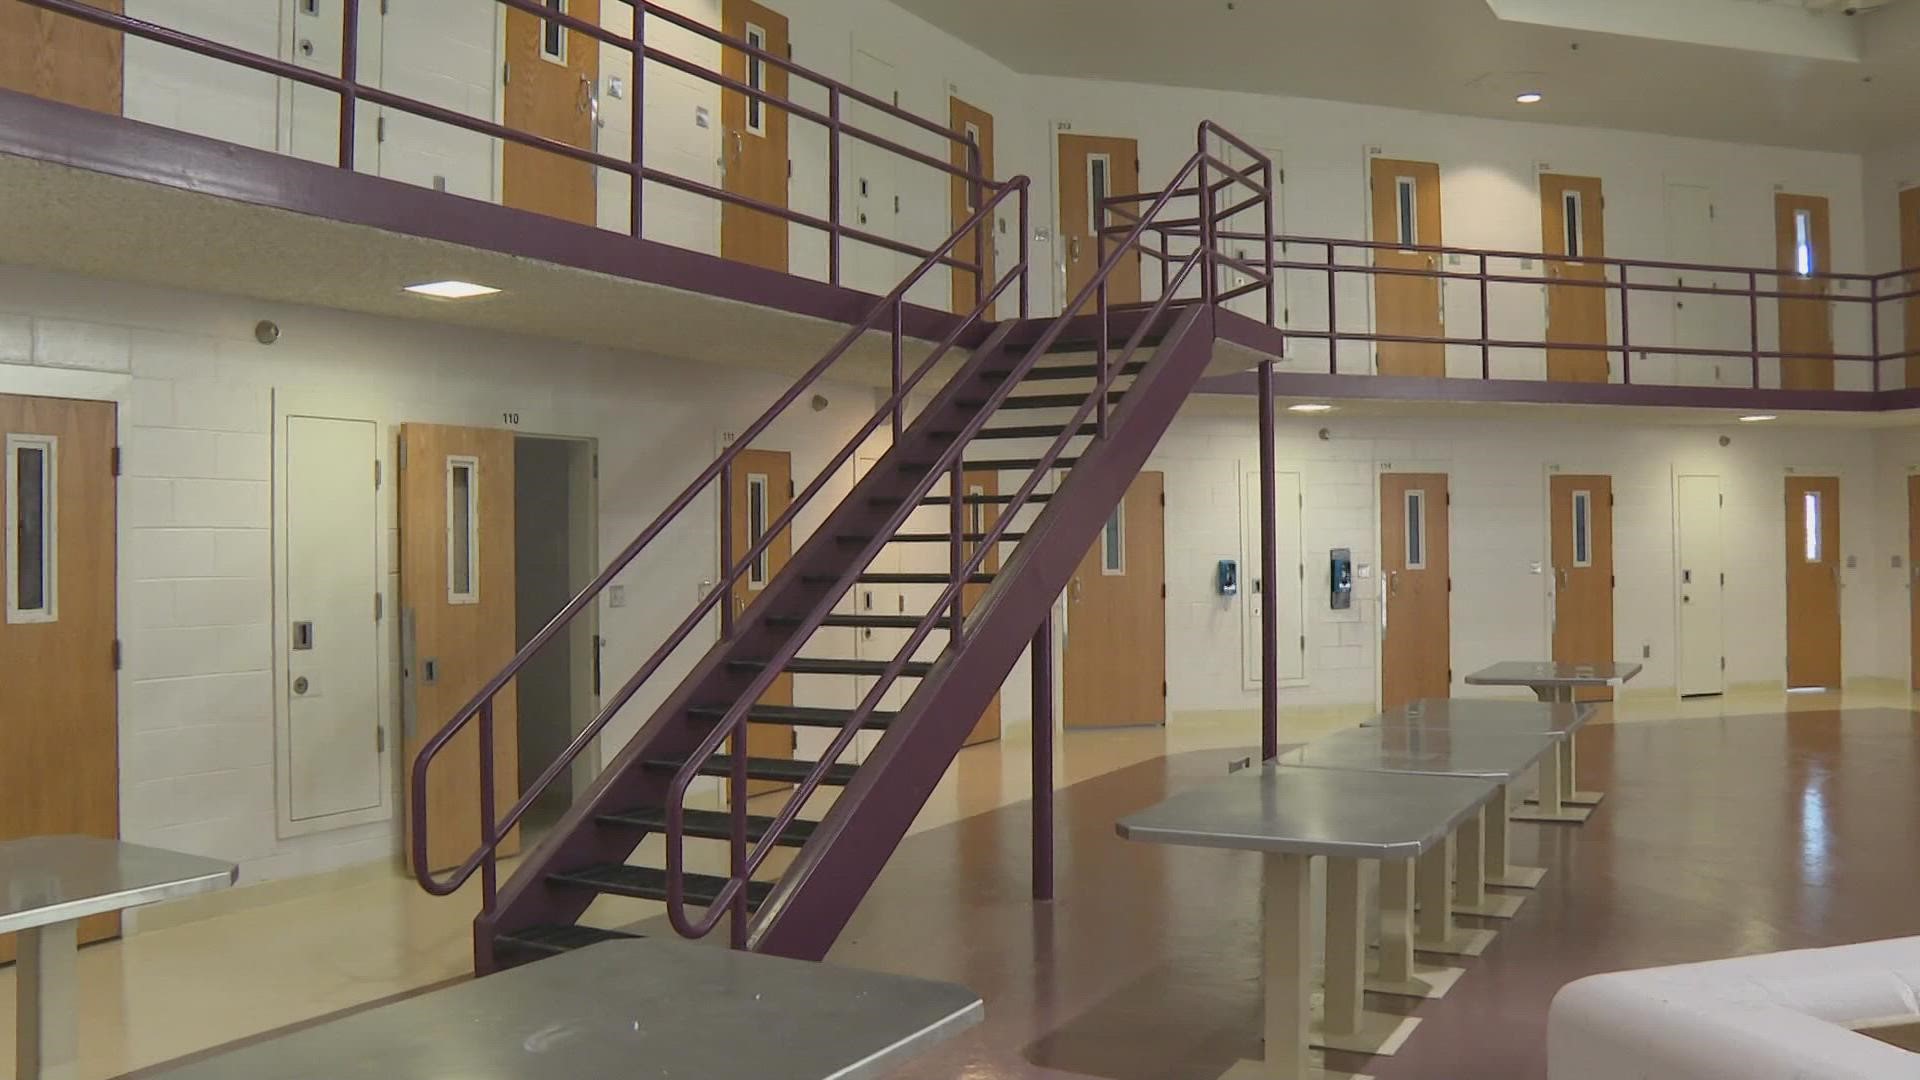 Both Cumberland County Jail and York County Jail report reduced visitation hours for inmates while corrections officers work mandatory overtime.